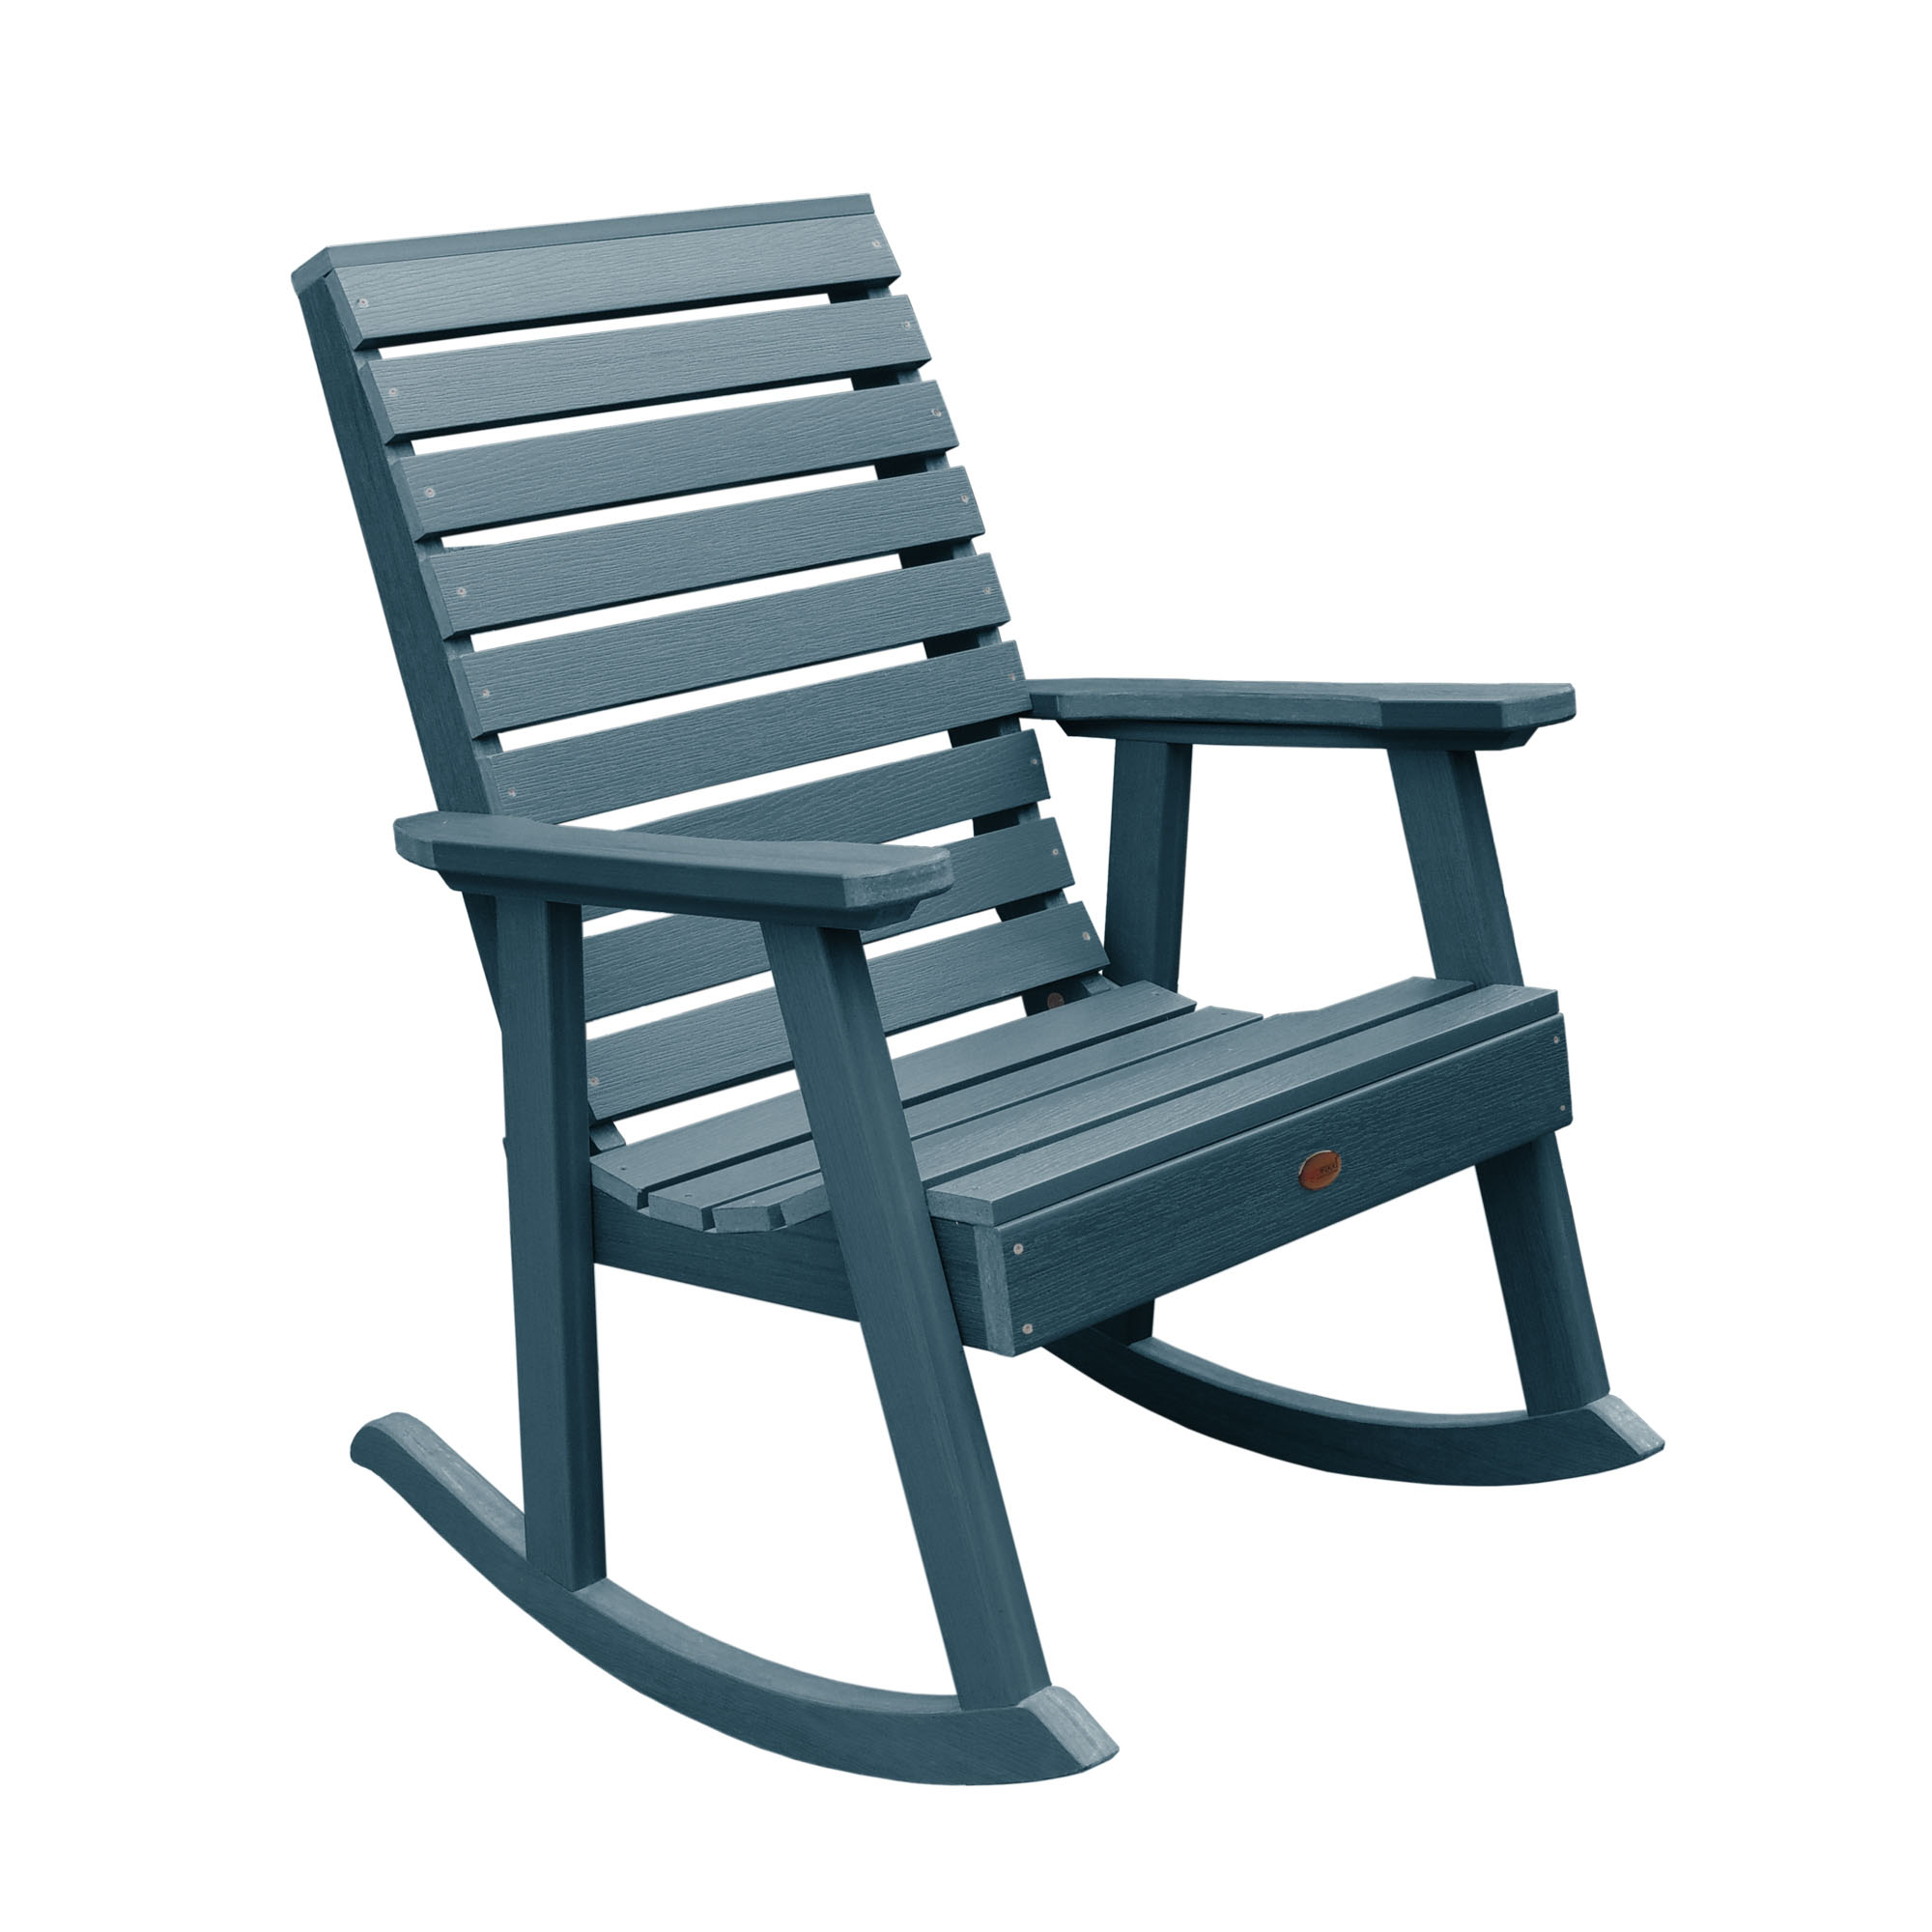 Weatherly Rocking Chair - image 1 of 2